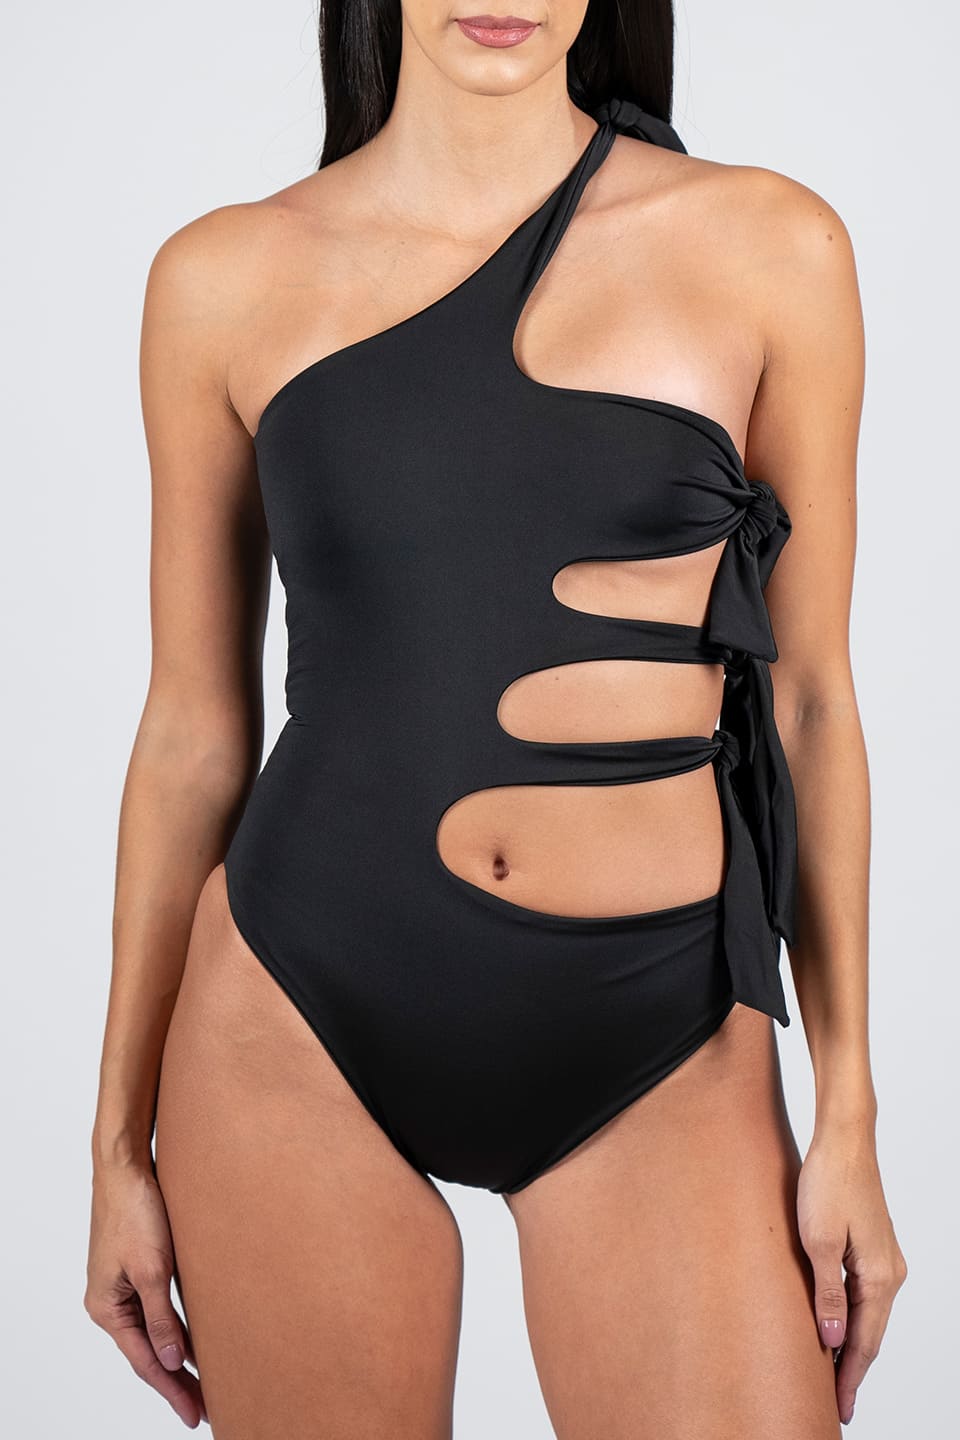 Shop online trendy Black Swimsuits from Lavishly Appointed Fashion designer. Product gallery 1